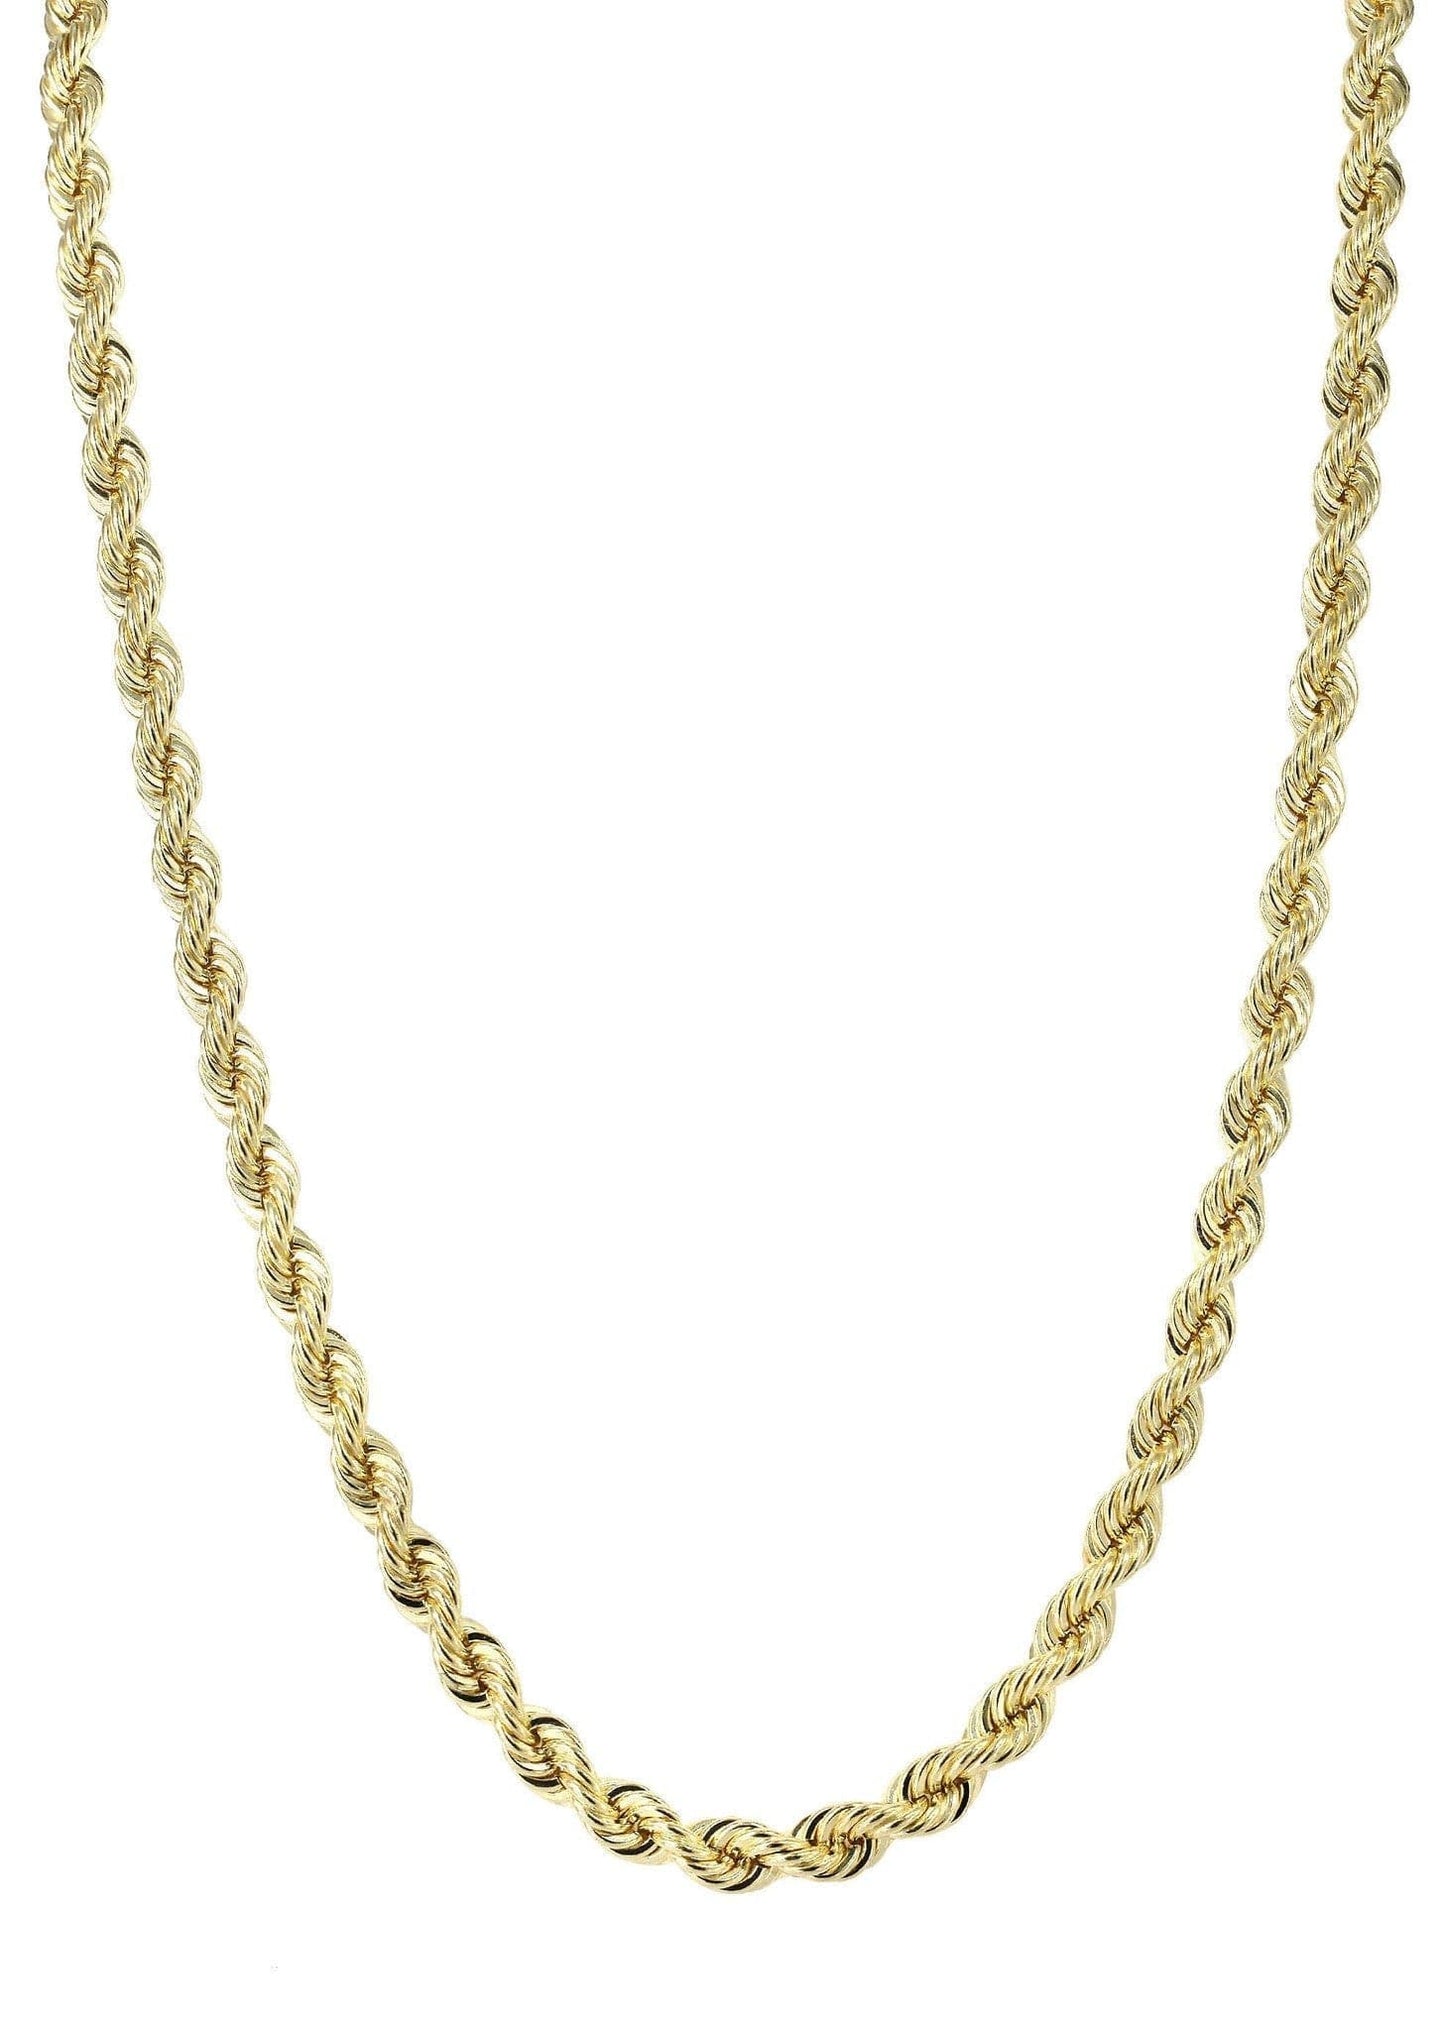 Gold Chain - Mens Solid Rope Chain 10K Gold MEN'S CHAINS FROST NYC 